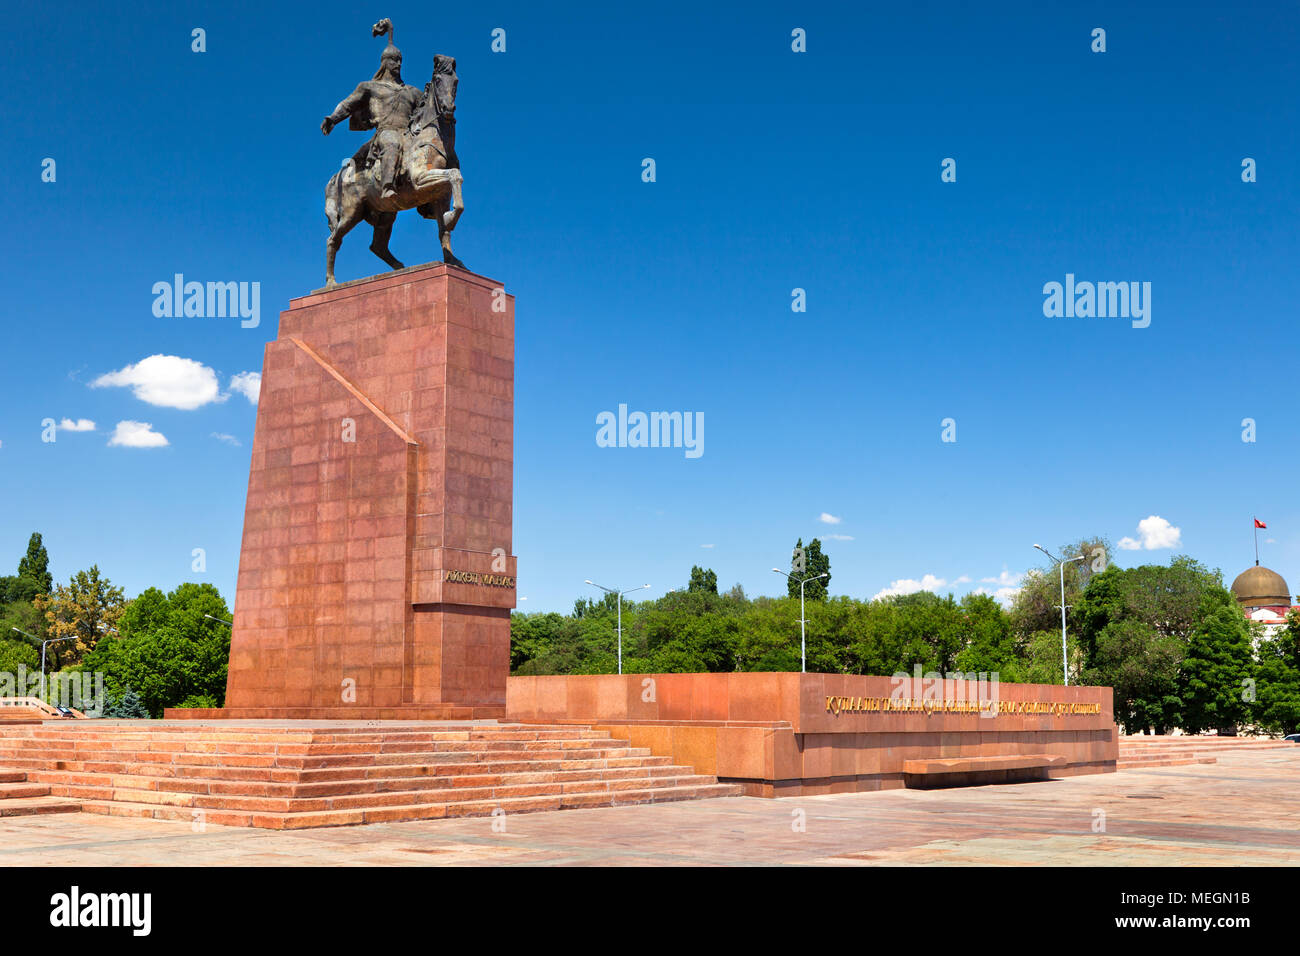 View of the monument to the hero of the national epic Manas on Ala-Too square in central Bishkek city, Kyrgyz Republic Stock Photo